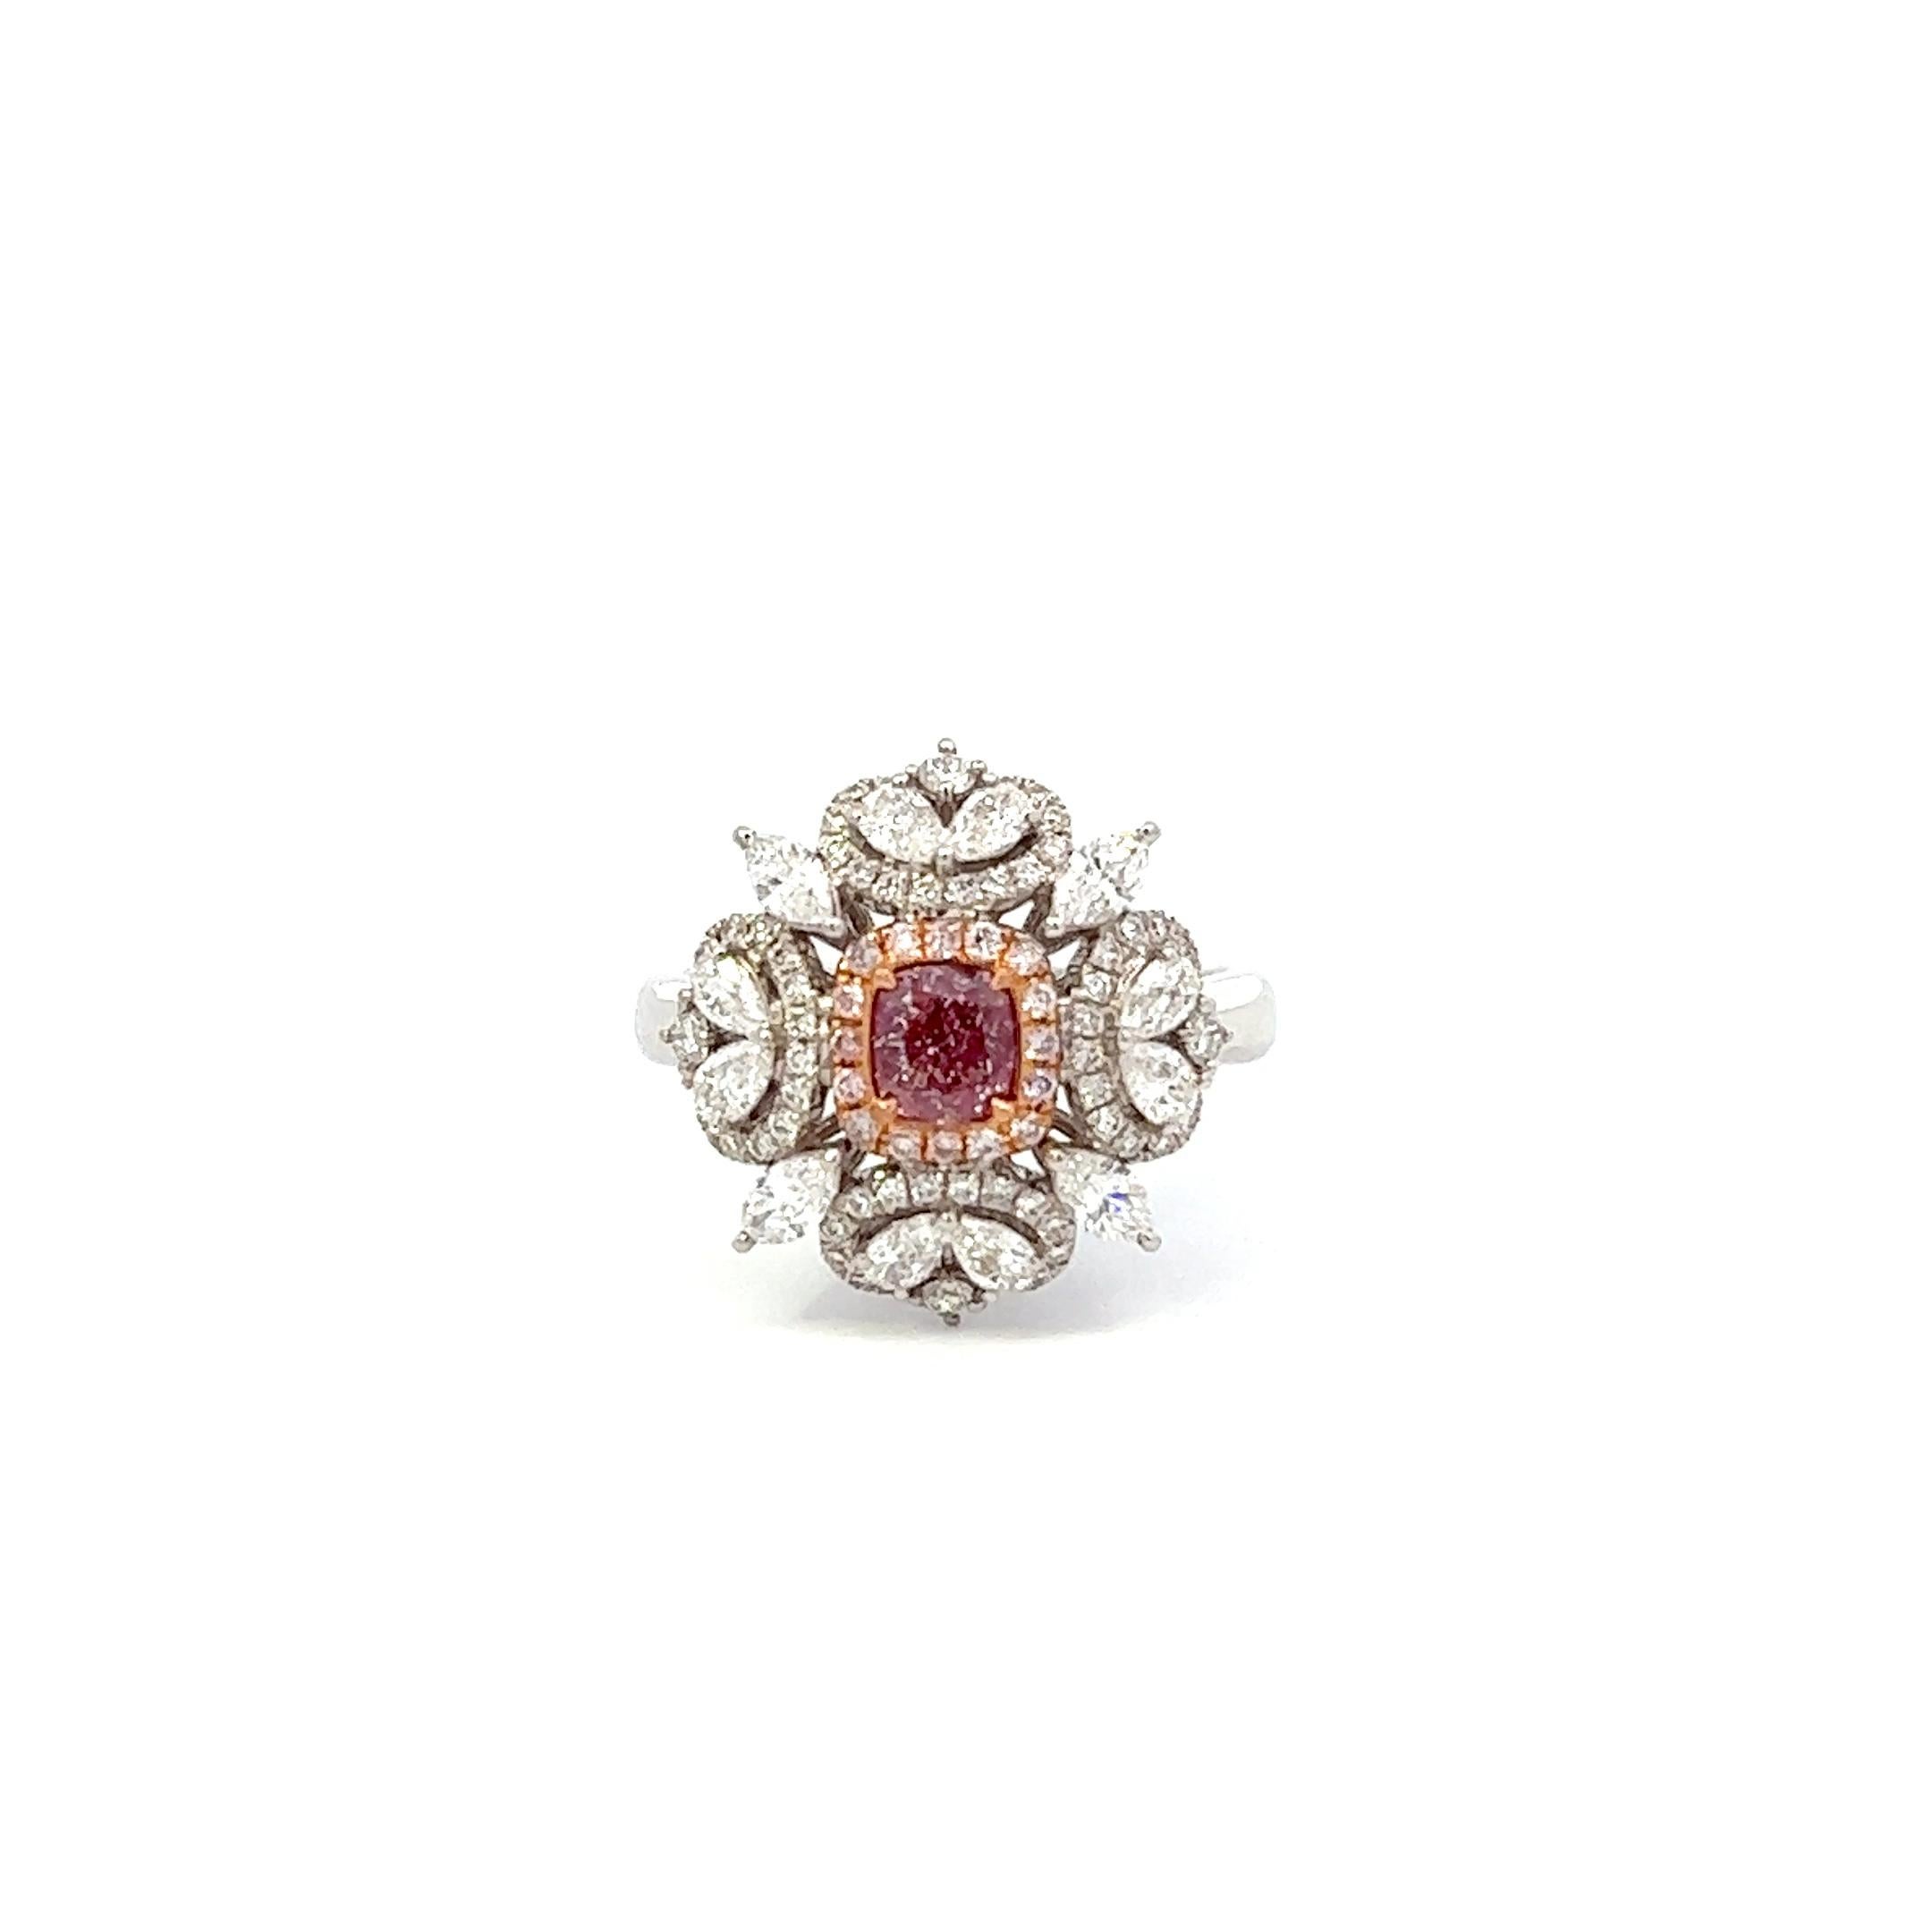 Center: 0.52ct Fancy Light Pink Brown Diamond Ring GIA# 1403626698
Setting: 18k White Gold 1.04cts Pink and White Diamonds